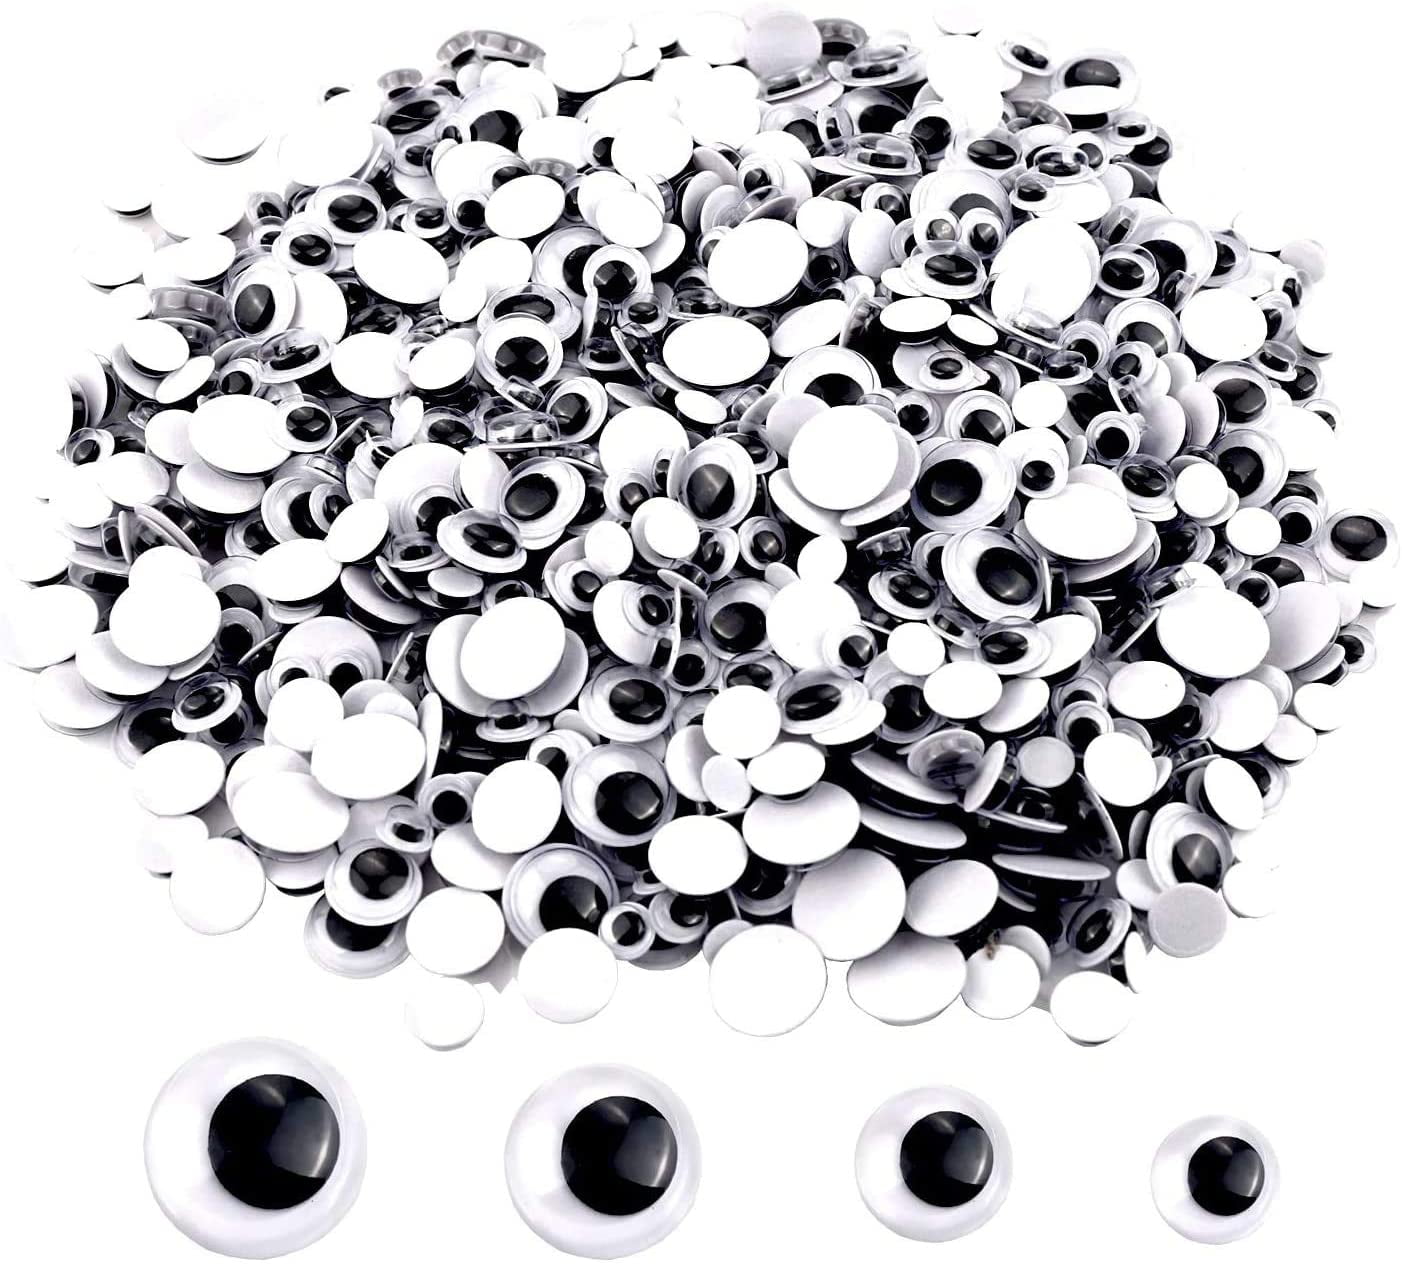 TrlaFy 40 Pcs Googly Wiggle Eyes with Self Adhesive, 1.57 inch Black Round Plastic for DIY Crafts Making